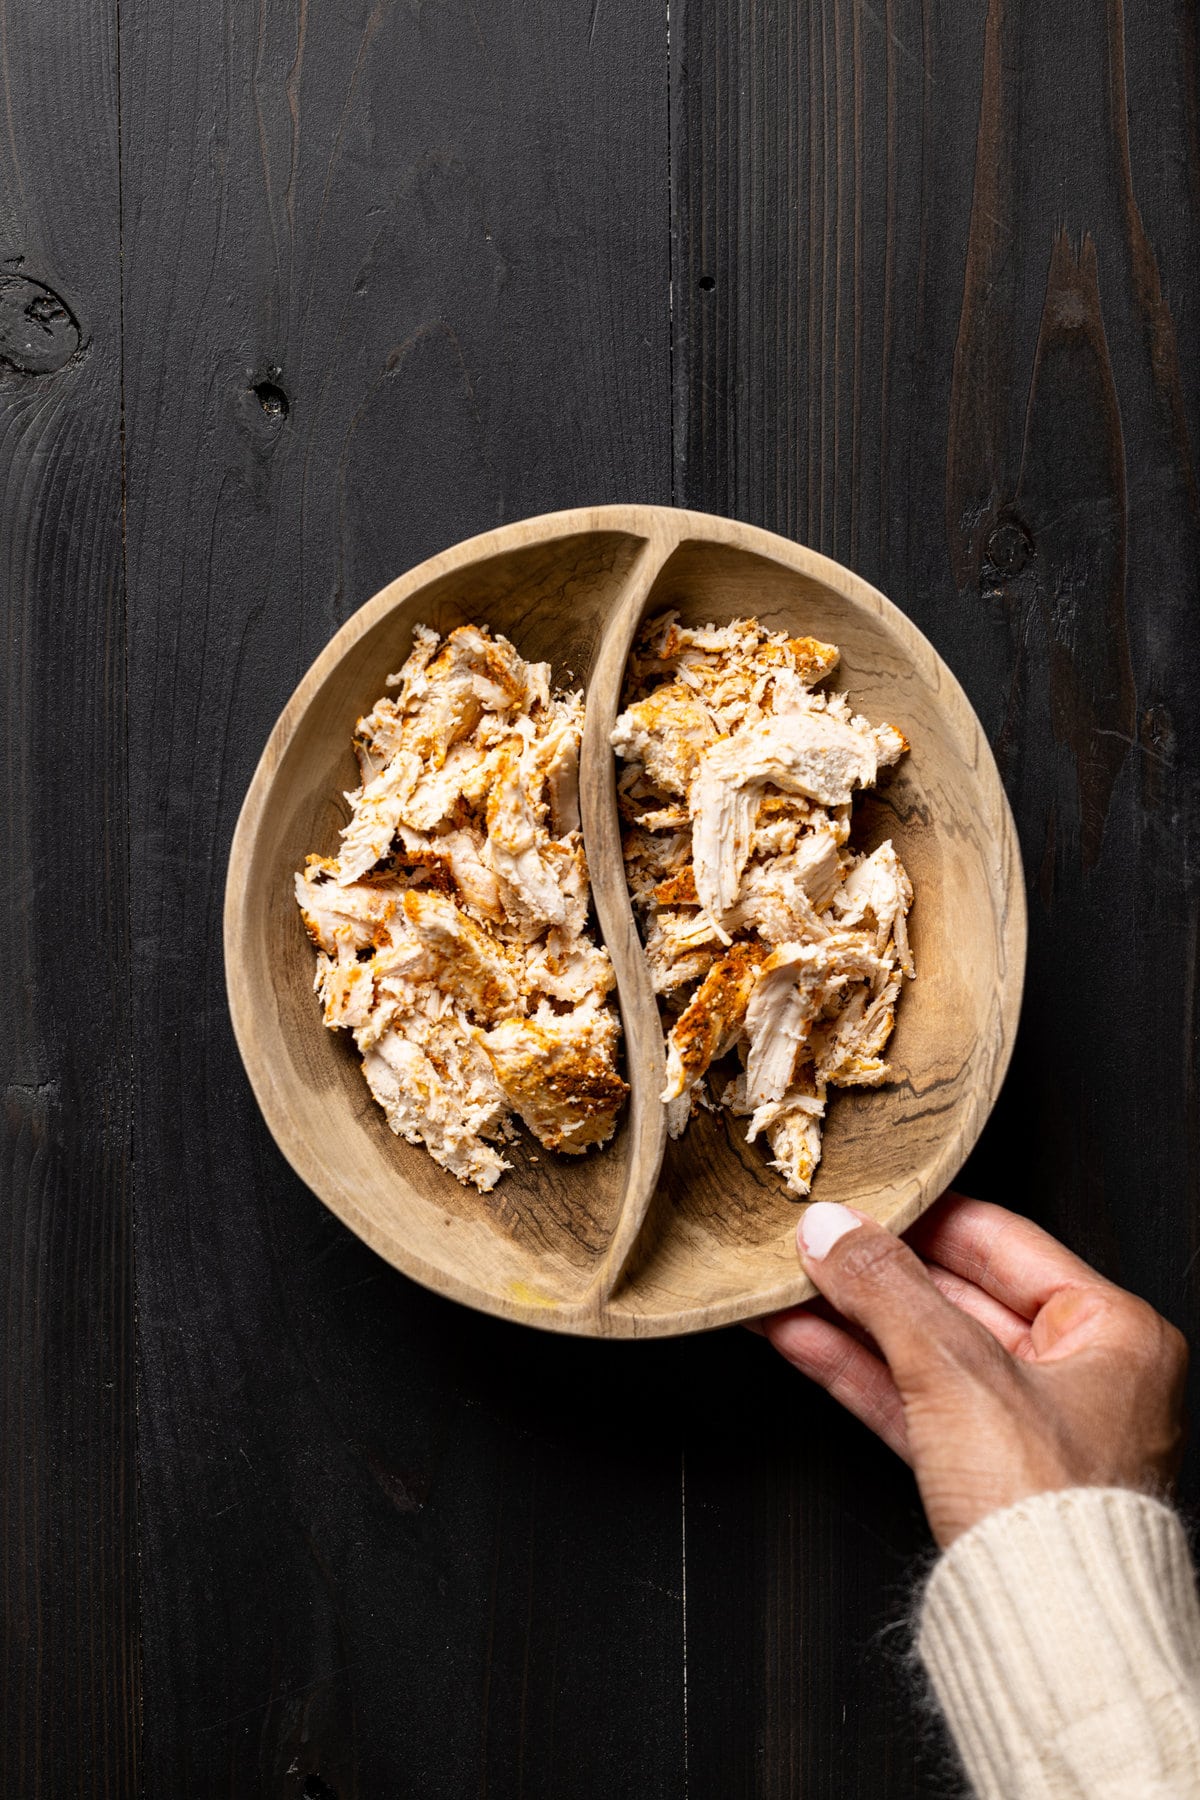 Shredded chicken in a separated wooden bowl